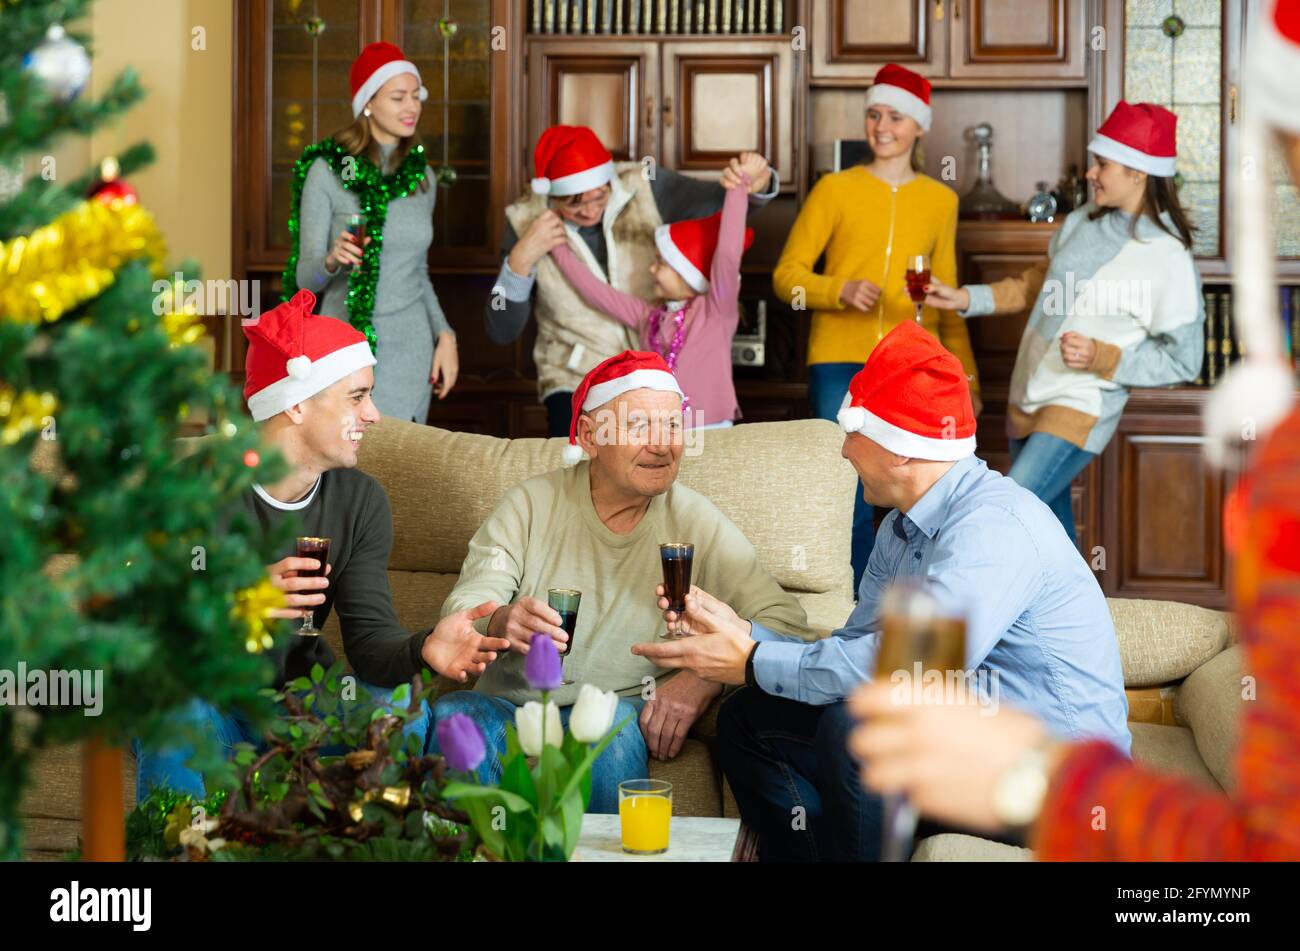 Members of big family spending time together on Christmas night at home Stock Photo